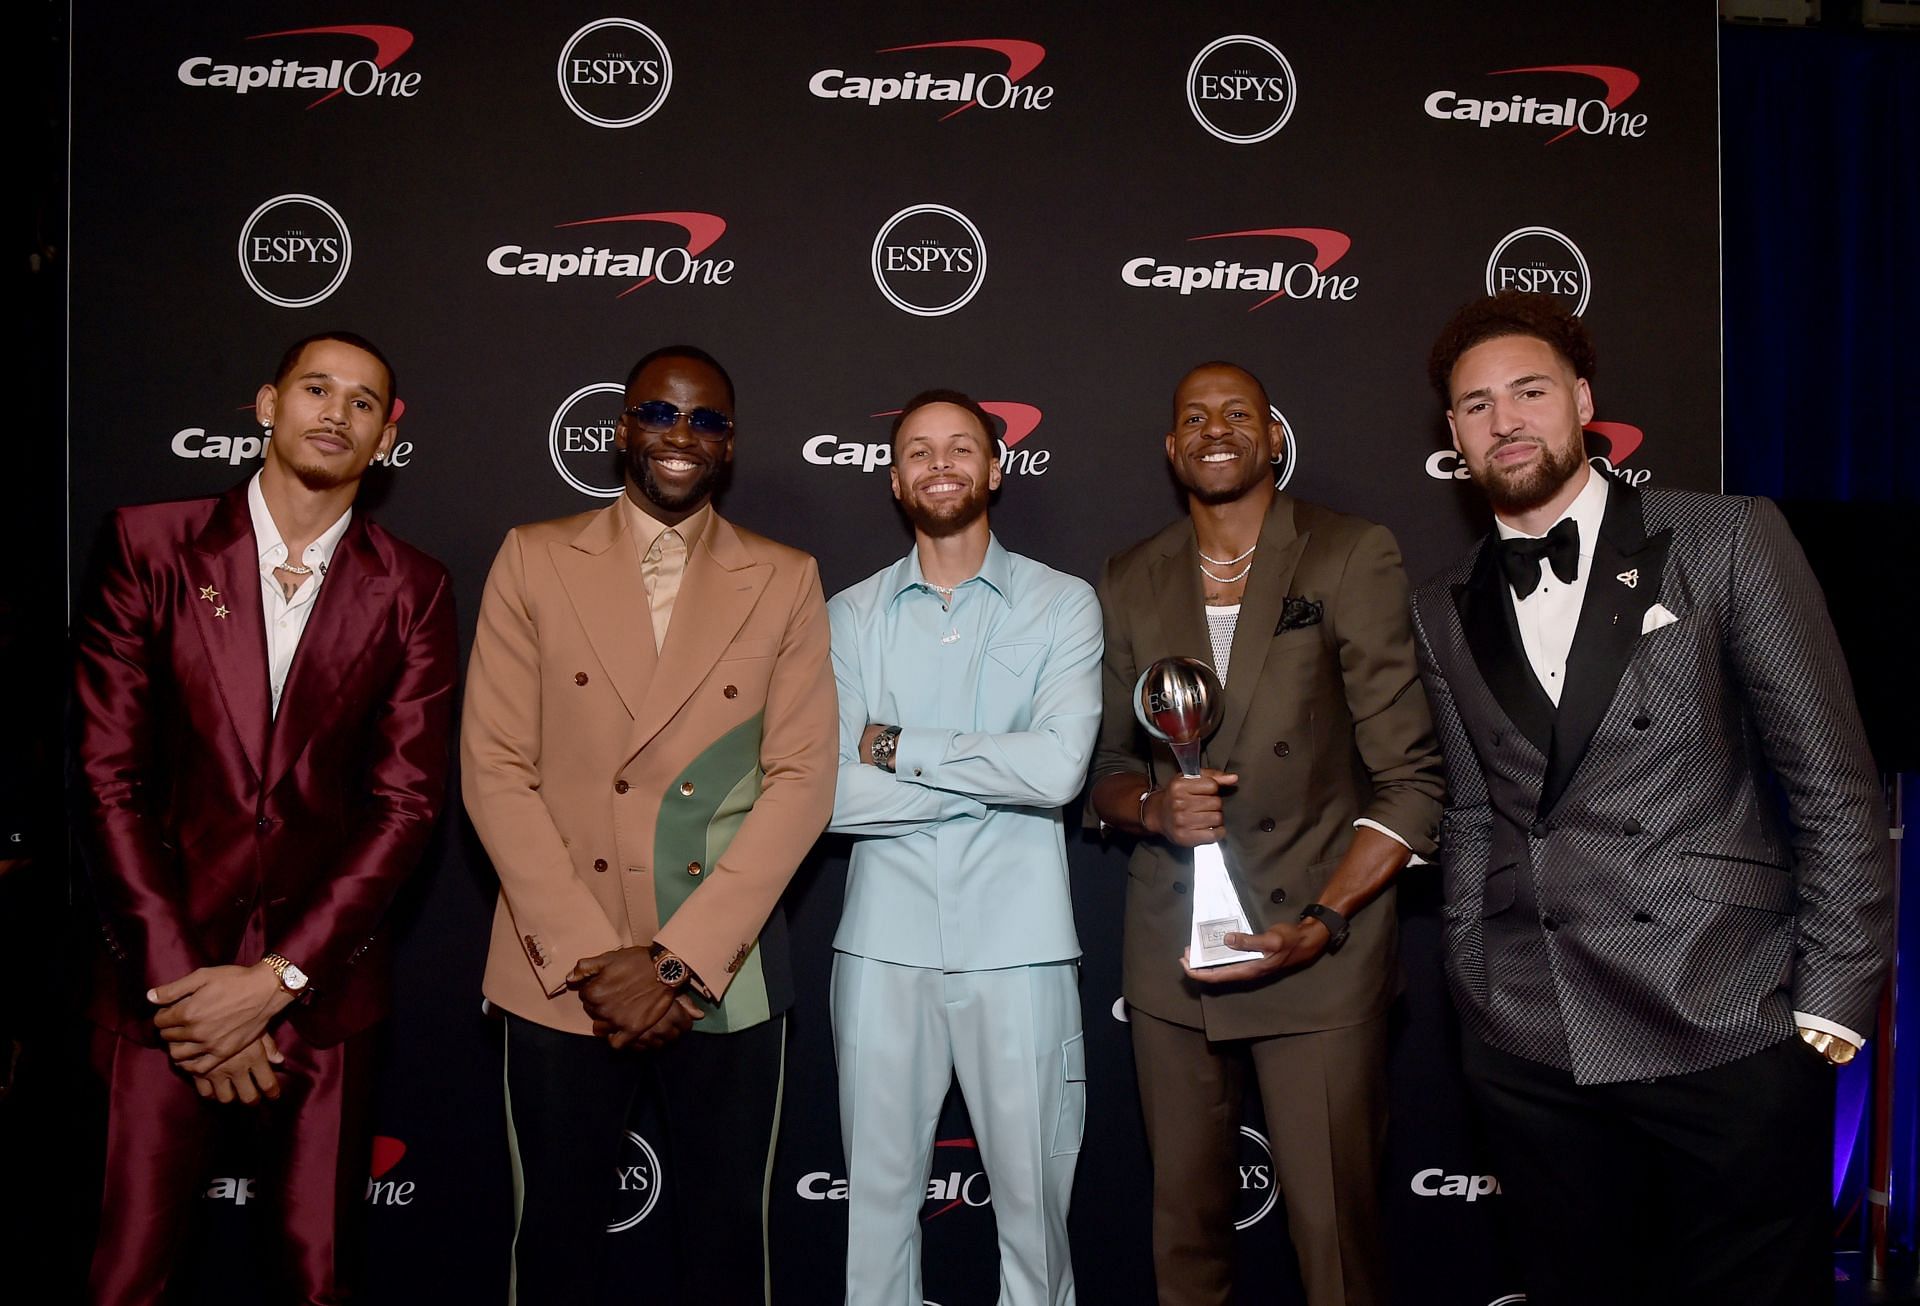 (L-R) Juan Toscano-Anderson, Draymond Green, Steph Curry, Andre Iguodala and &lt;a href=&#039;https://www.sportskeeda.com/basketball/klay-thompson&#039; target=&#039;_blank&#039; rel=&#039;noopener noreferrer&#039;&gt;Klay Thompson&lt;/a&gt; of the Golden State Warriors, winners of Best Team at the 2022 ESPYs